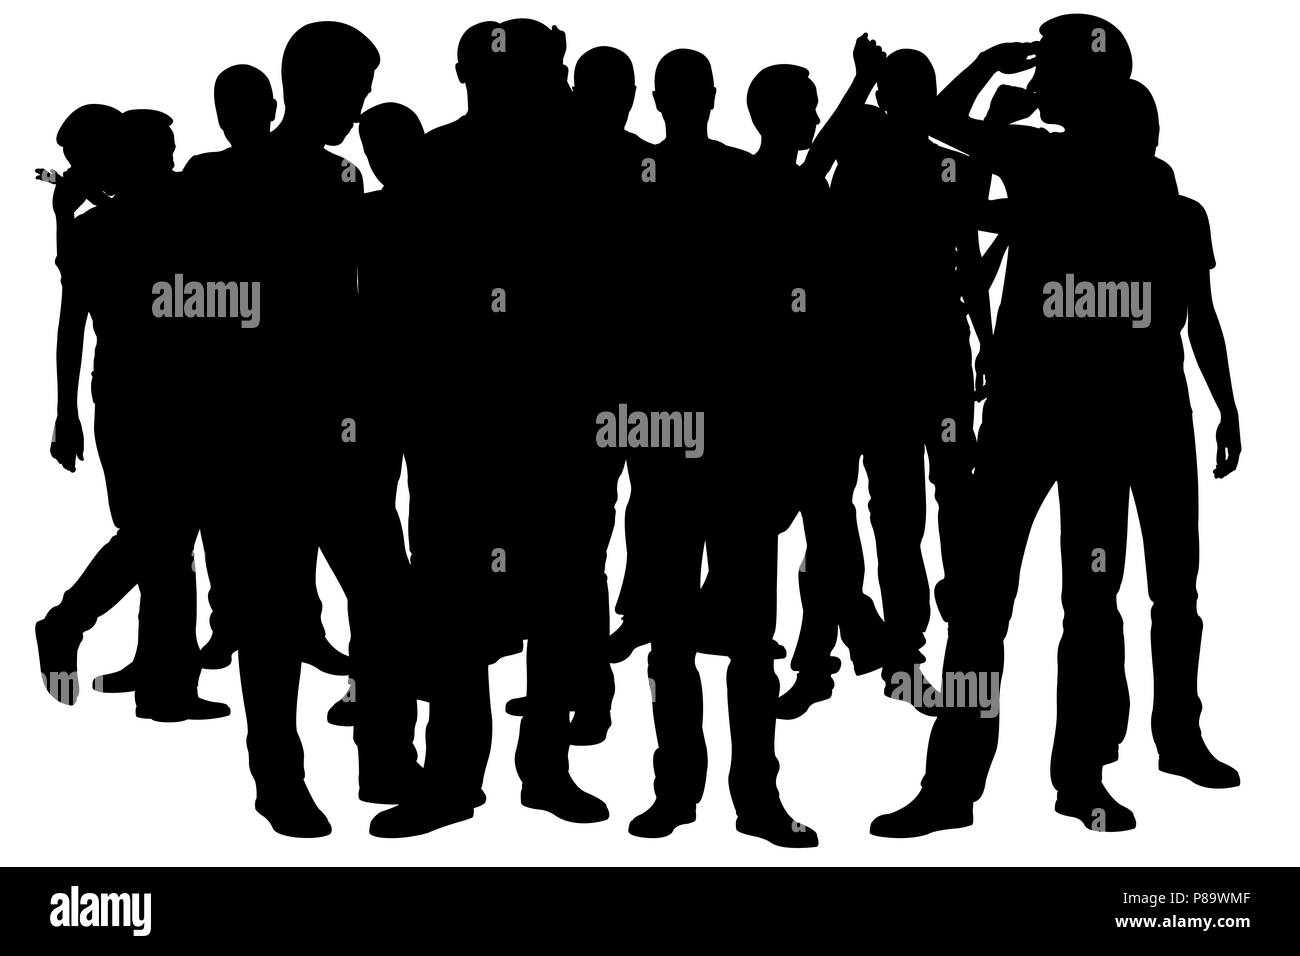 Illustration d'une foule isolated on white Banque D'Images